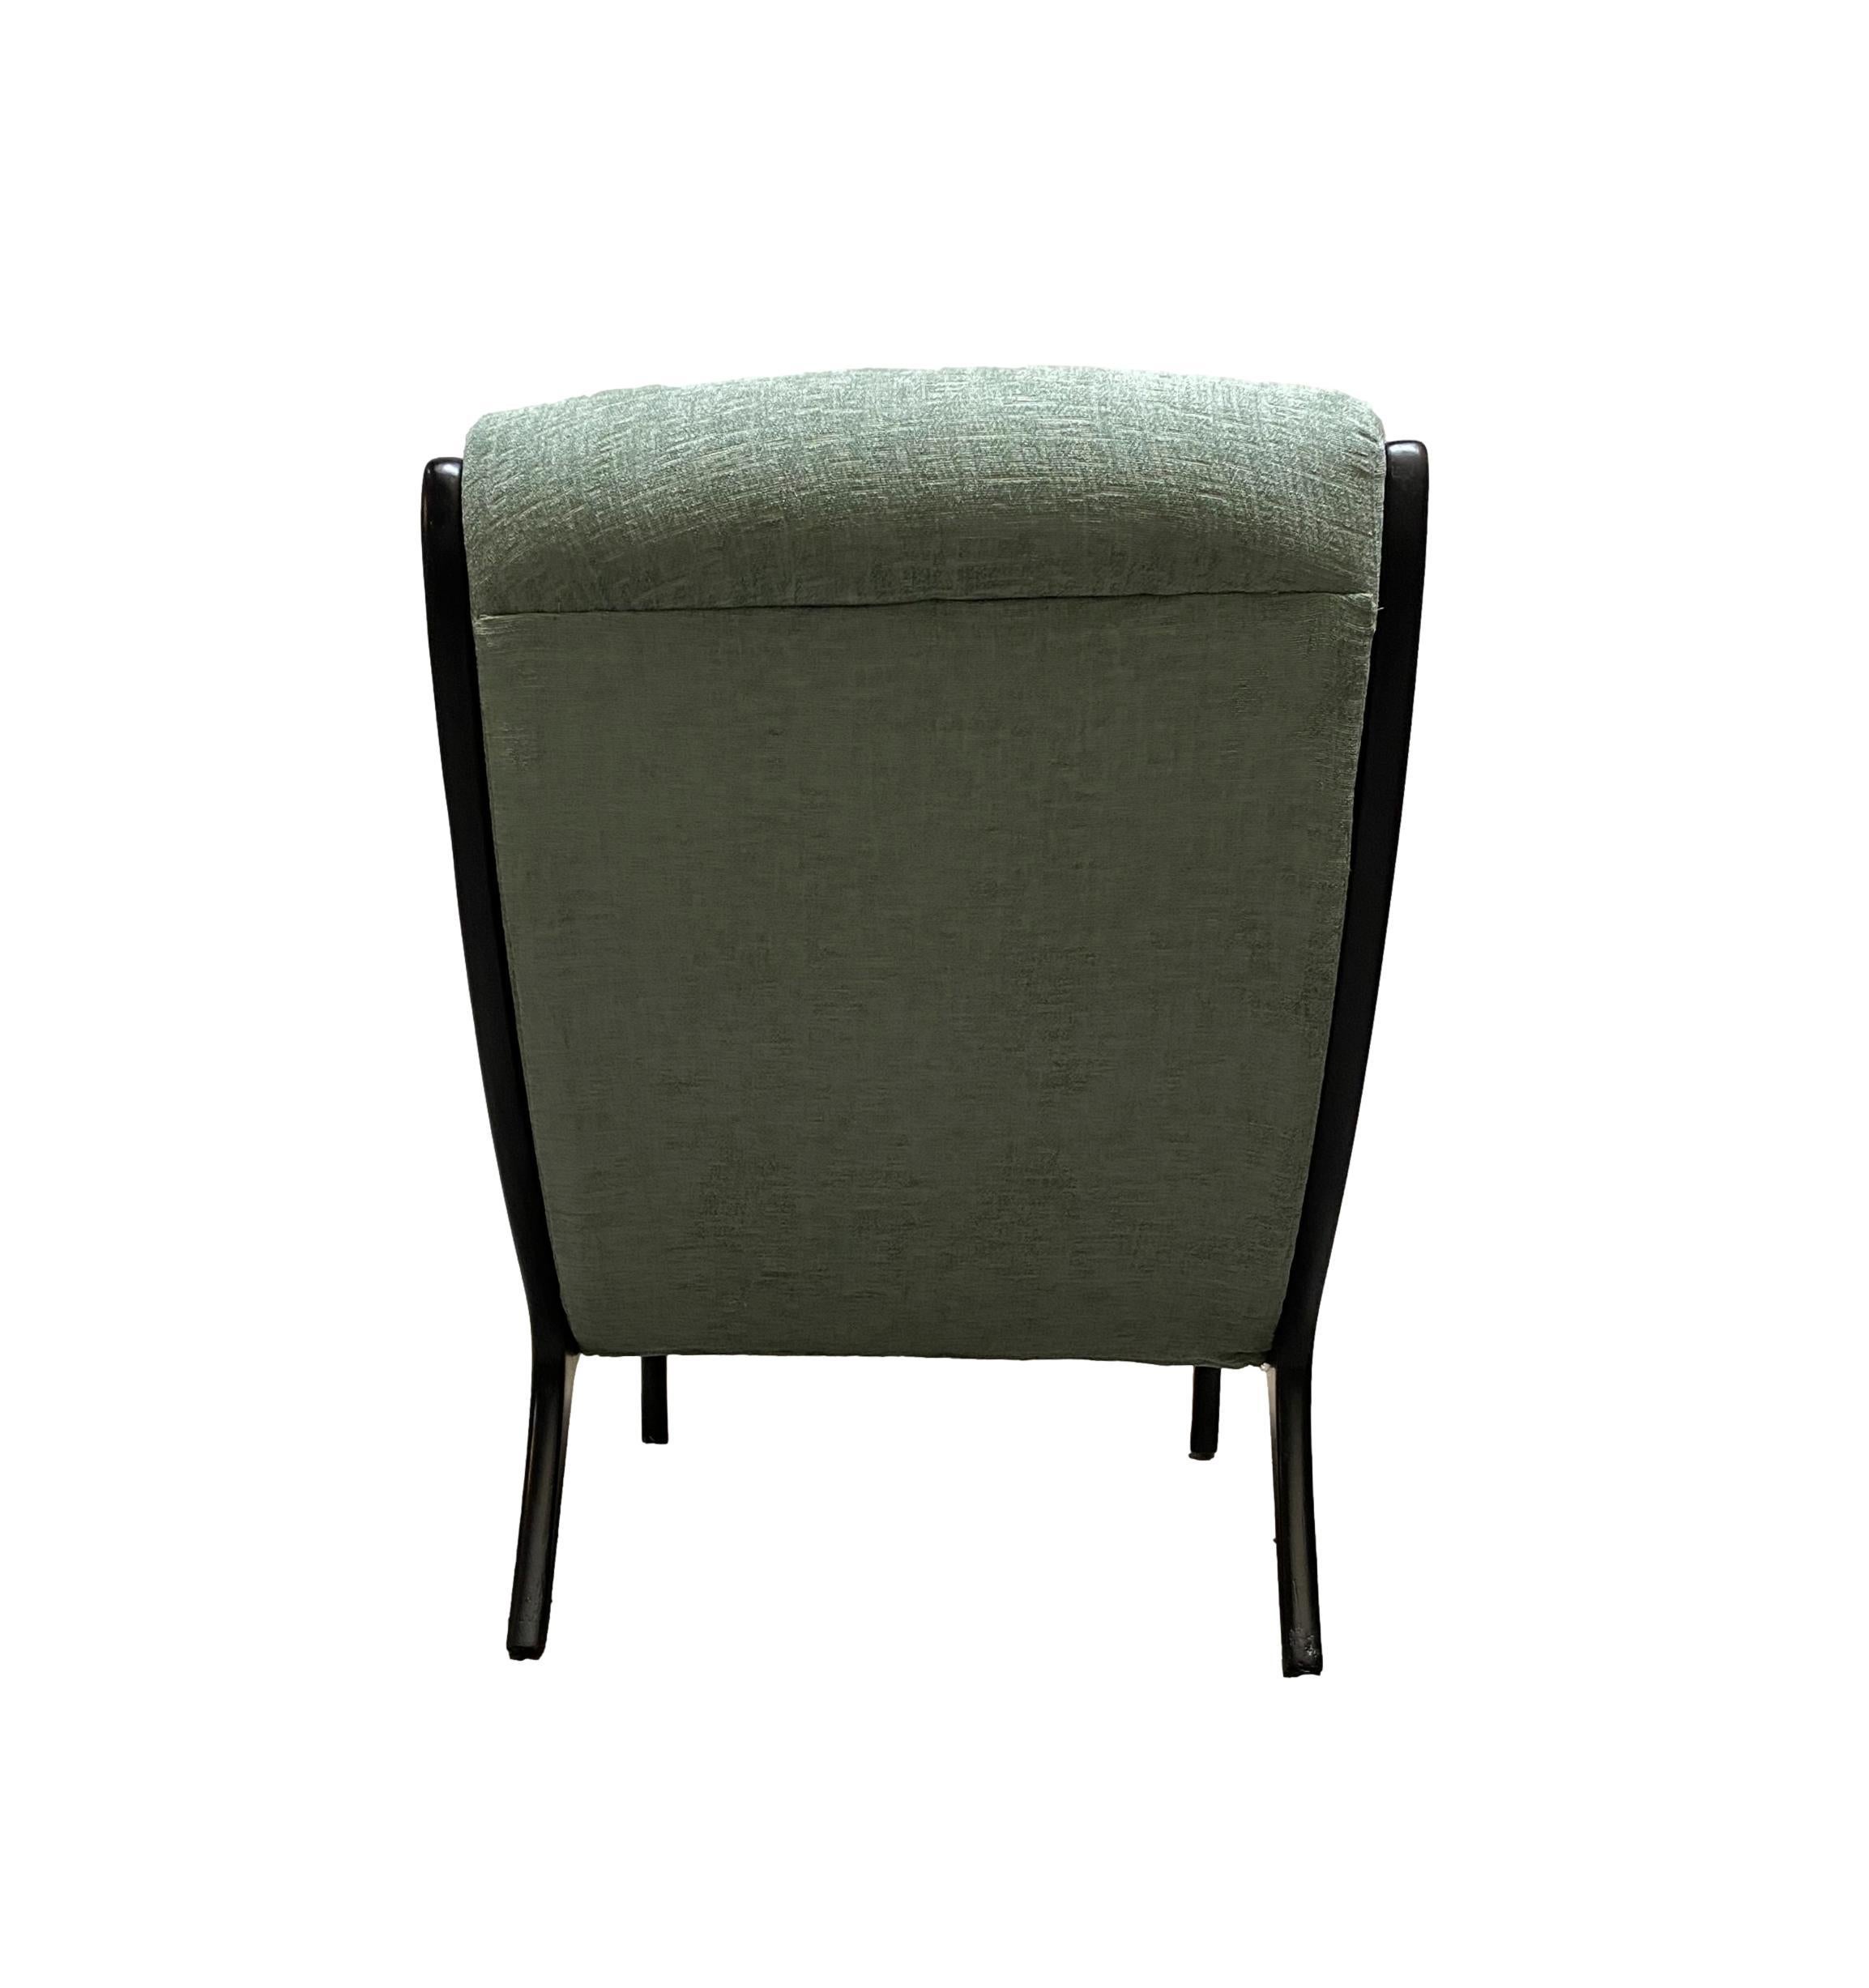 European Ezio Longhi for Elam Armchair in Wood and Green Fabric, Italy, 1950